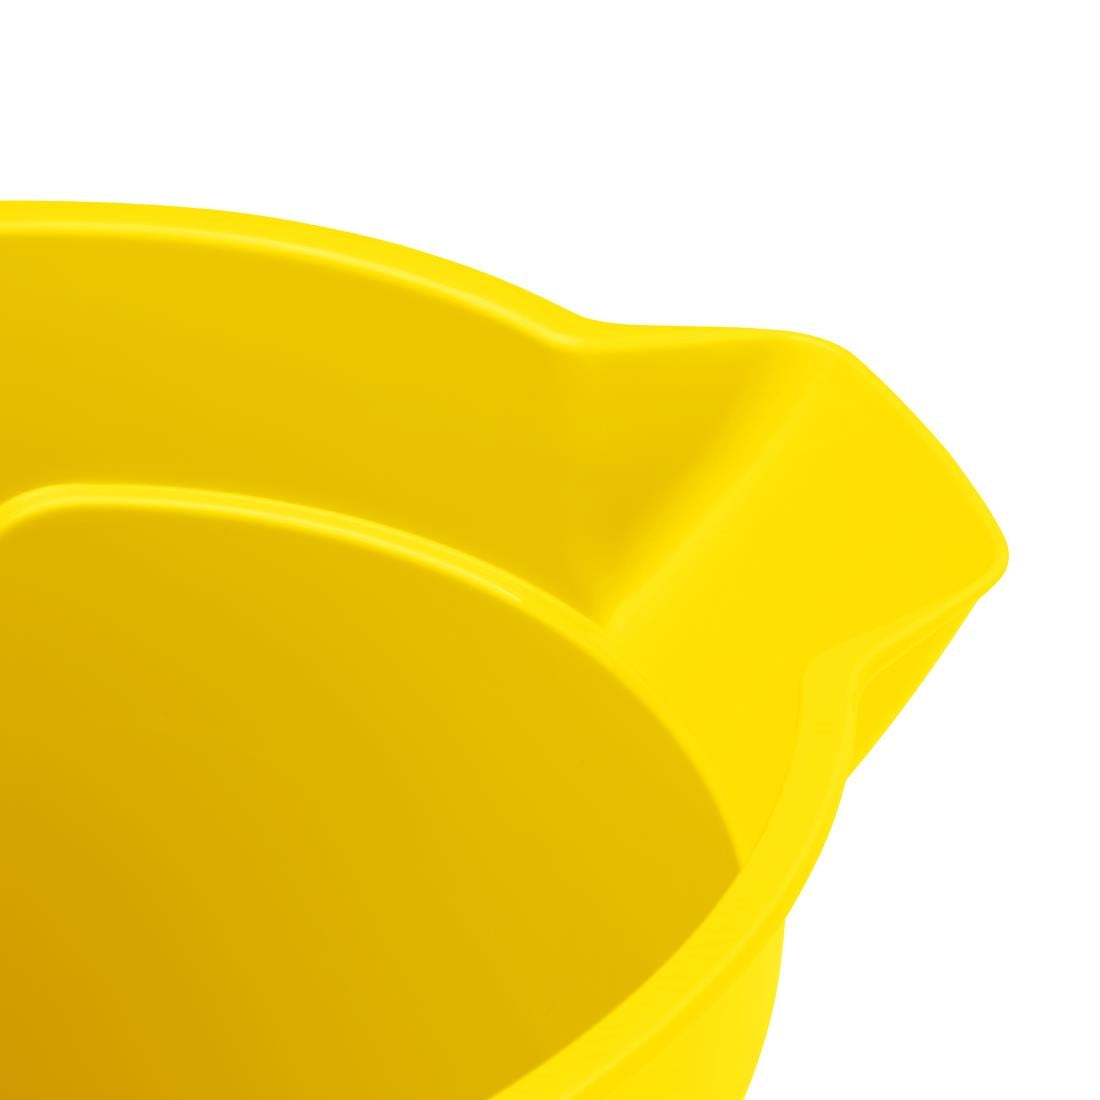 FU834 Jantex Yellow Graduated Bucket with Pouring Lip 10ltr